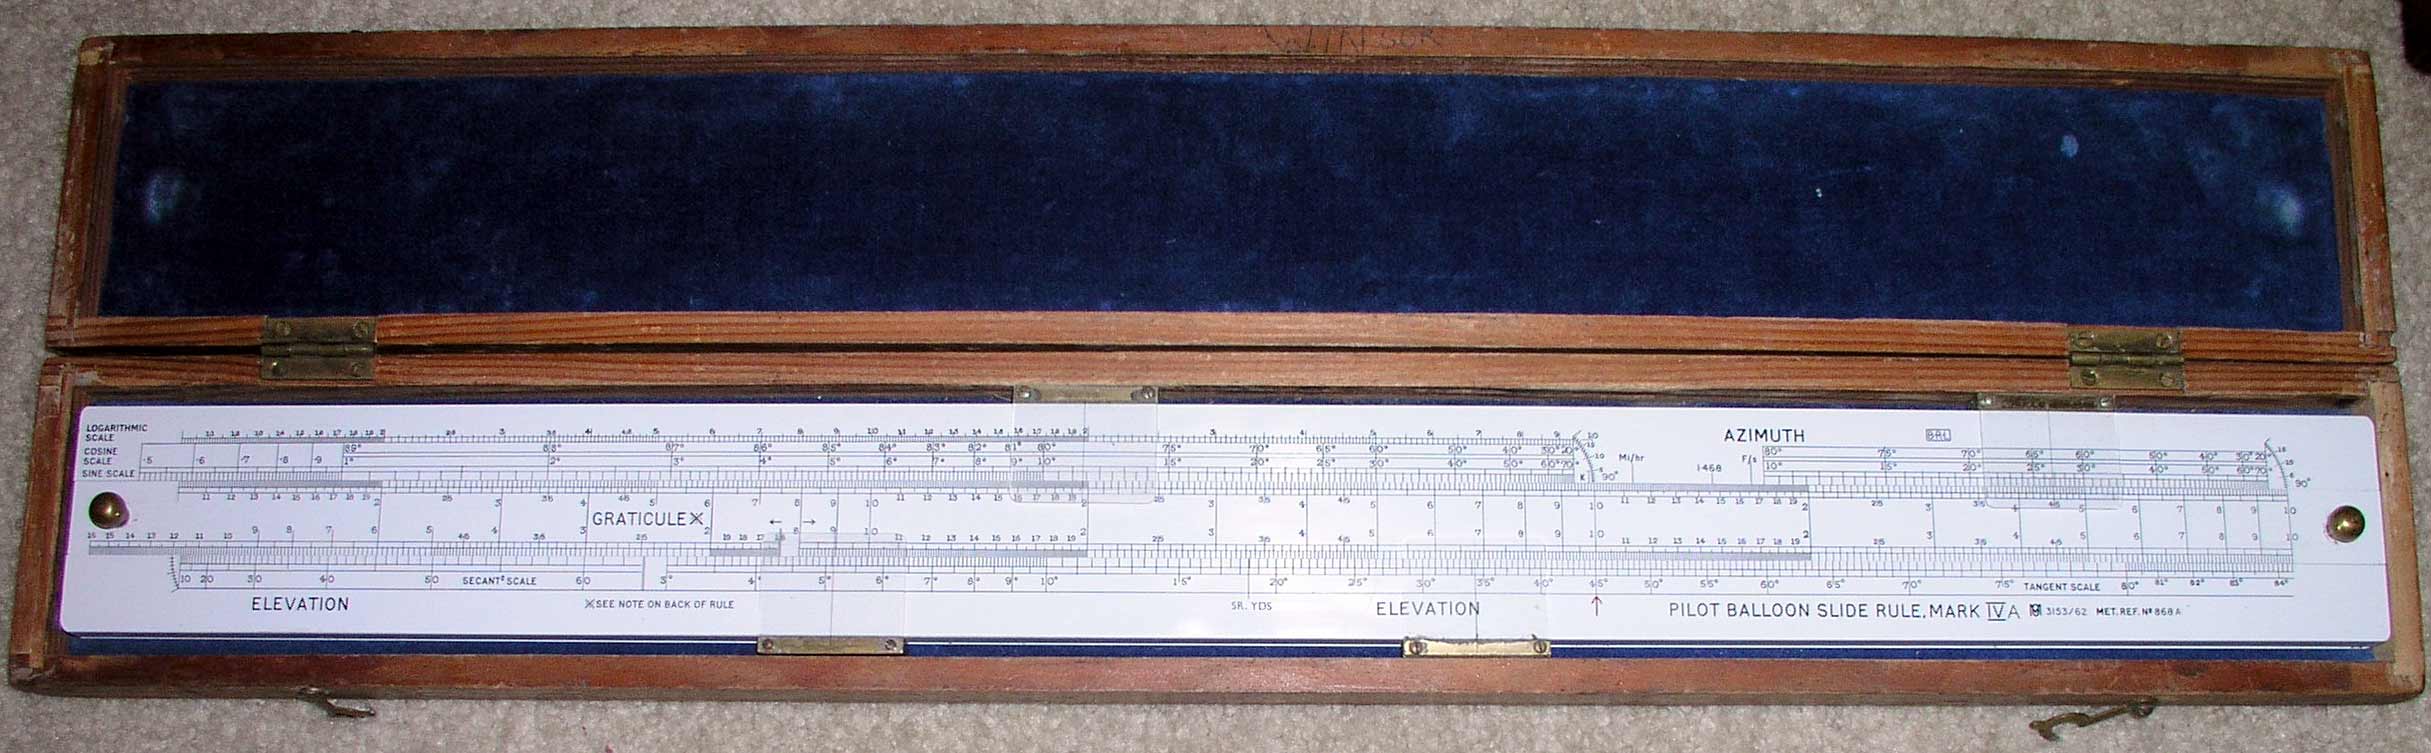 Large Image of the Mark IV.A Pilot Balloon Slide Rule